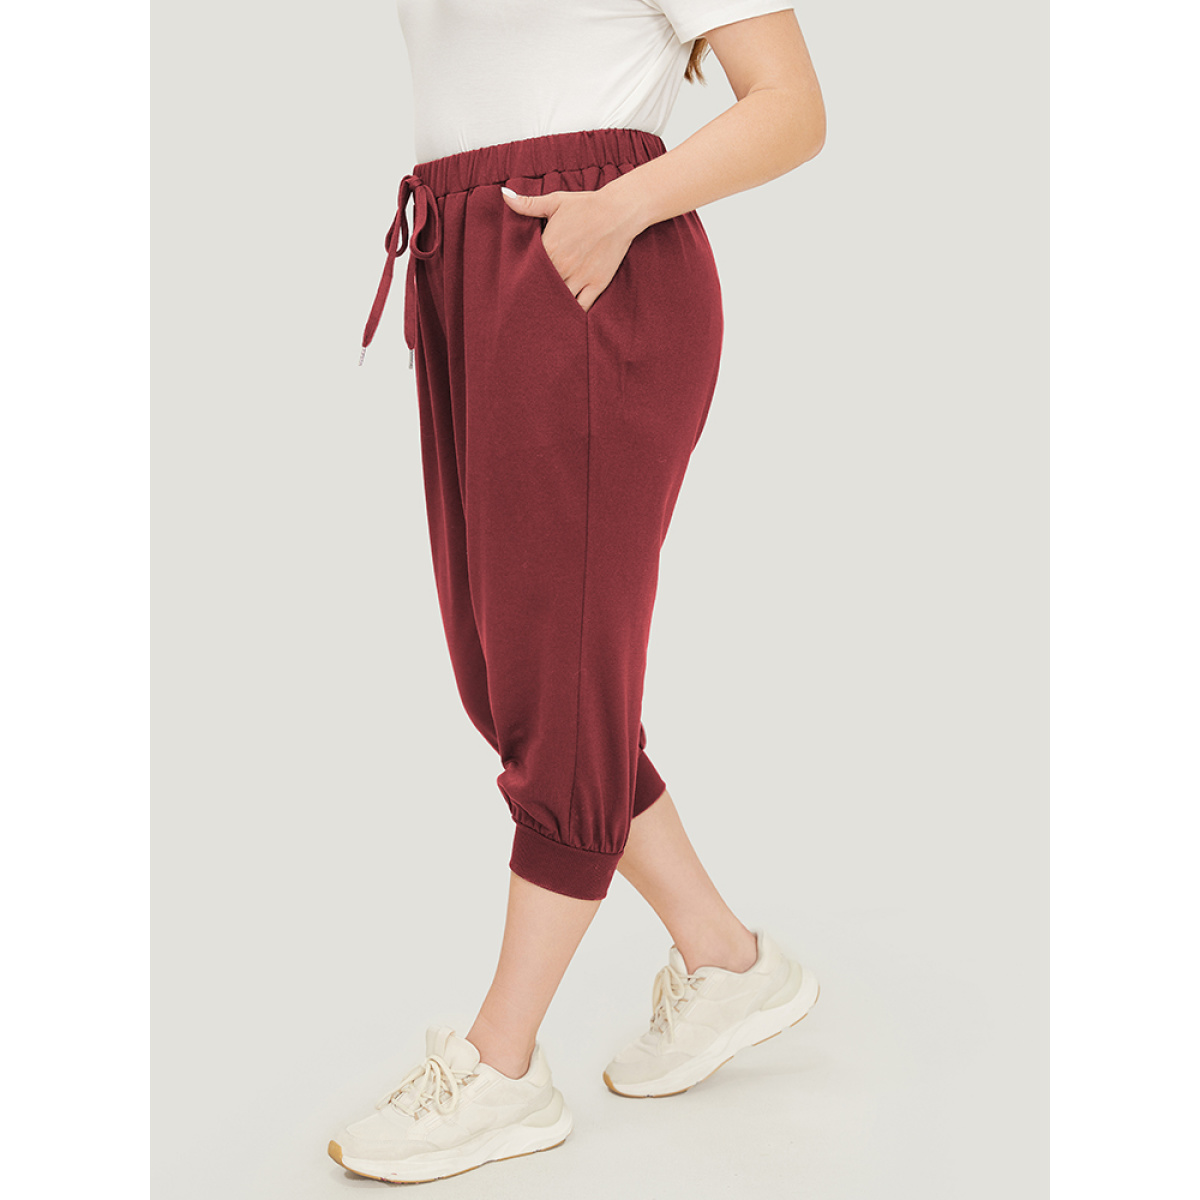 

Plus Size Solid Knot Front Pocket Carrot Pants Women Burgundy Casual High Rise Dailywear Pants BloomChic